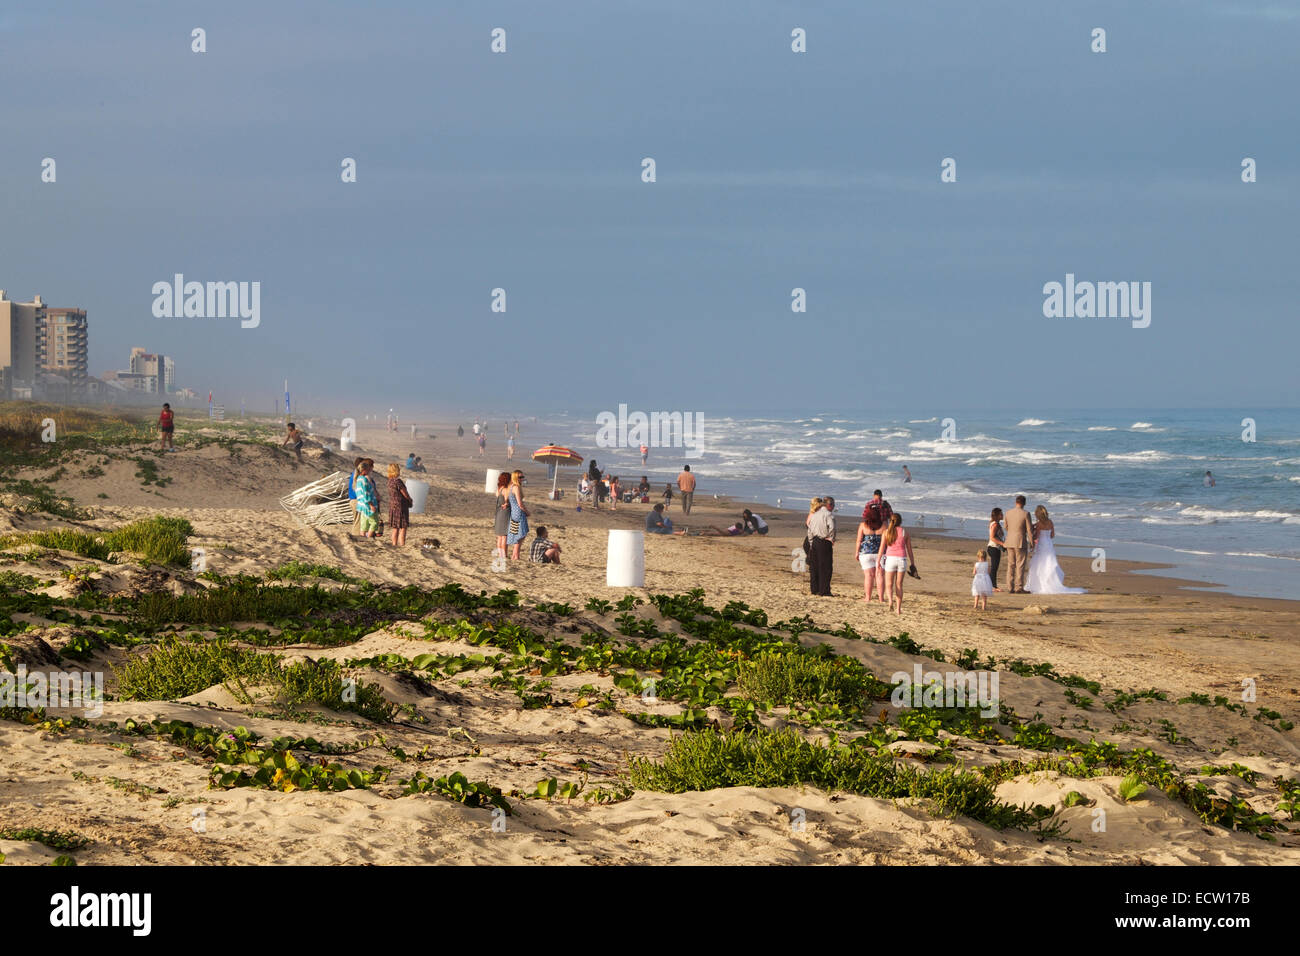 A wedding on the beach at South Padre Island, Texas, USA Stock Photo